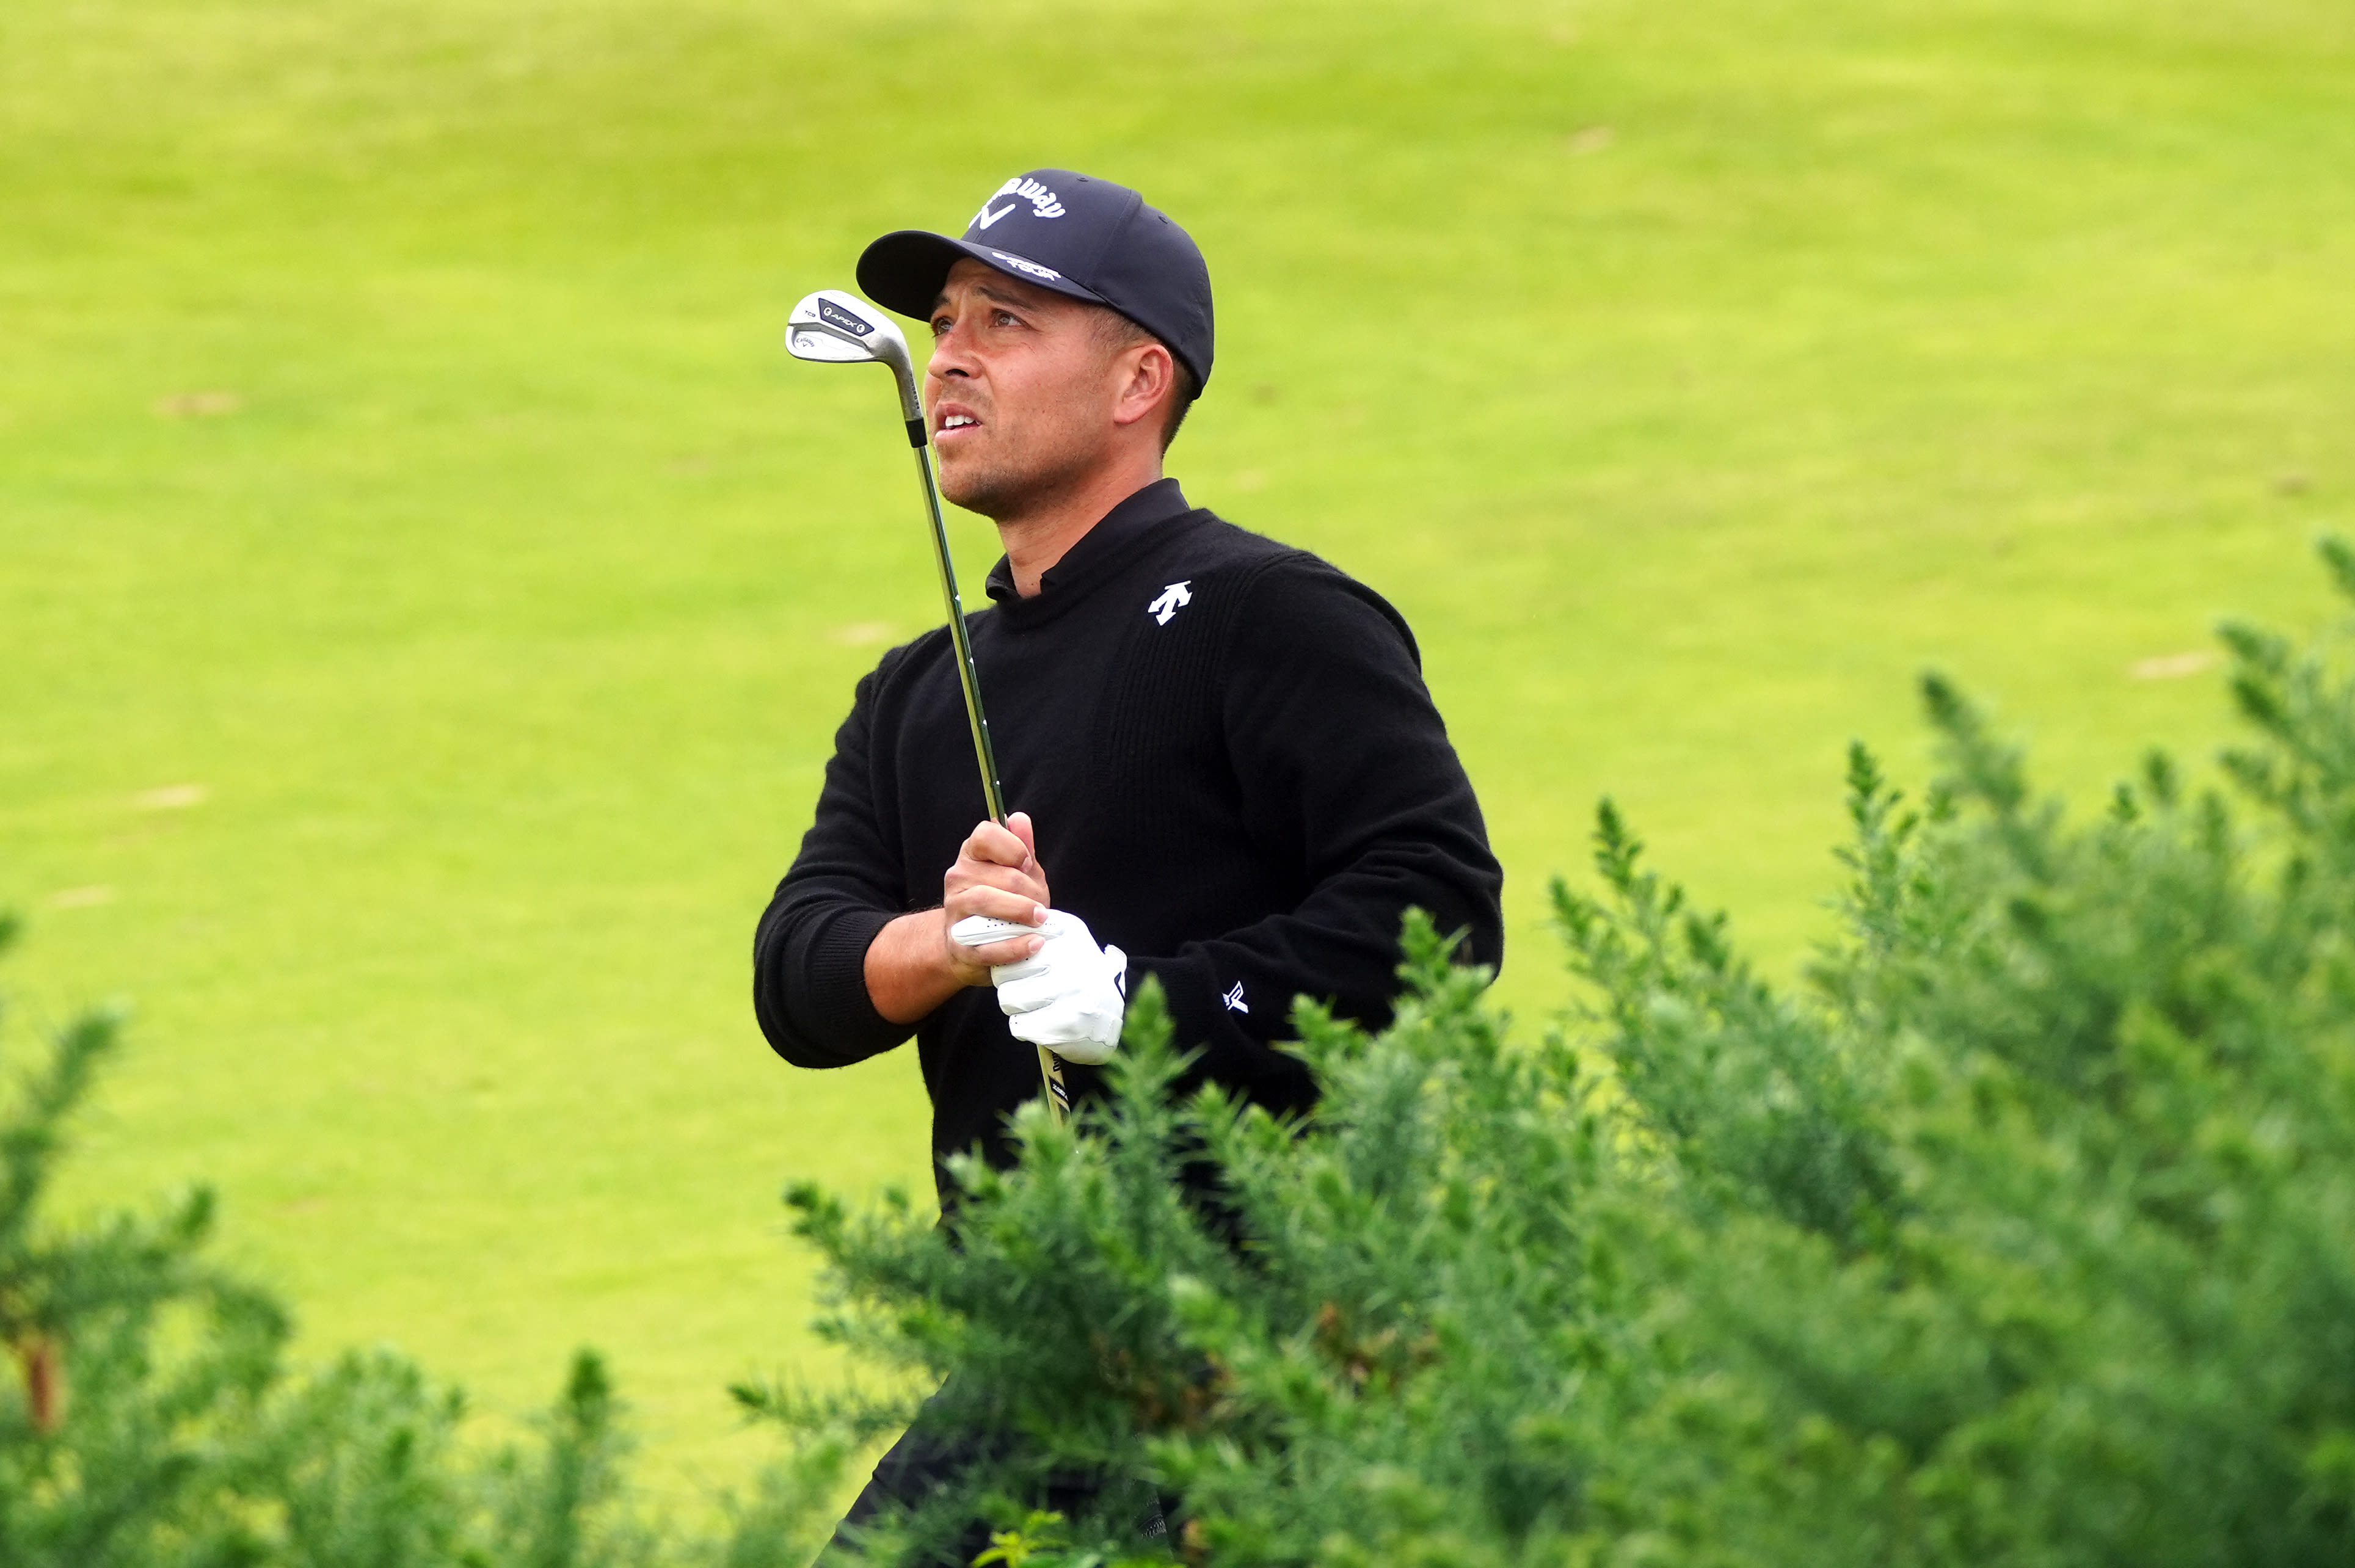 British Open payouts, purse: How much did Xander Schauffele earn for his win at Royal Troon?